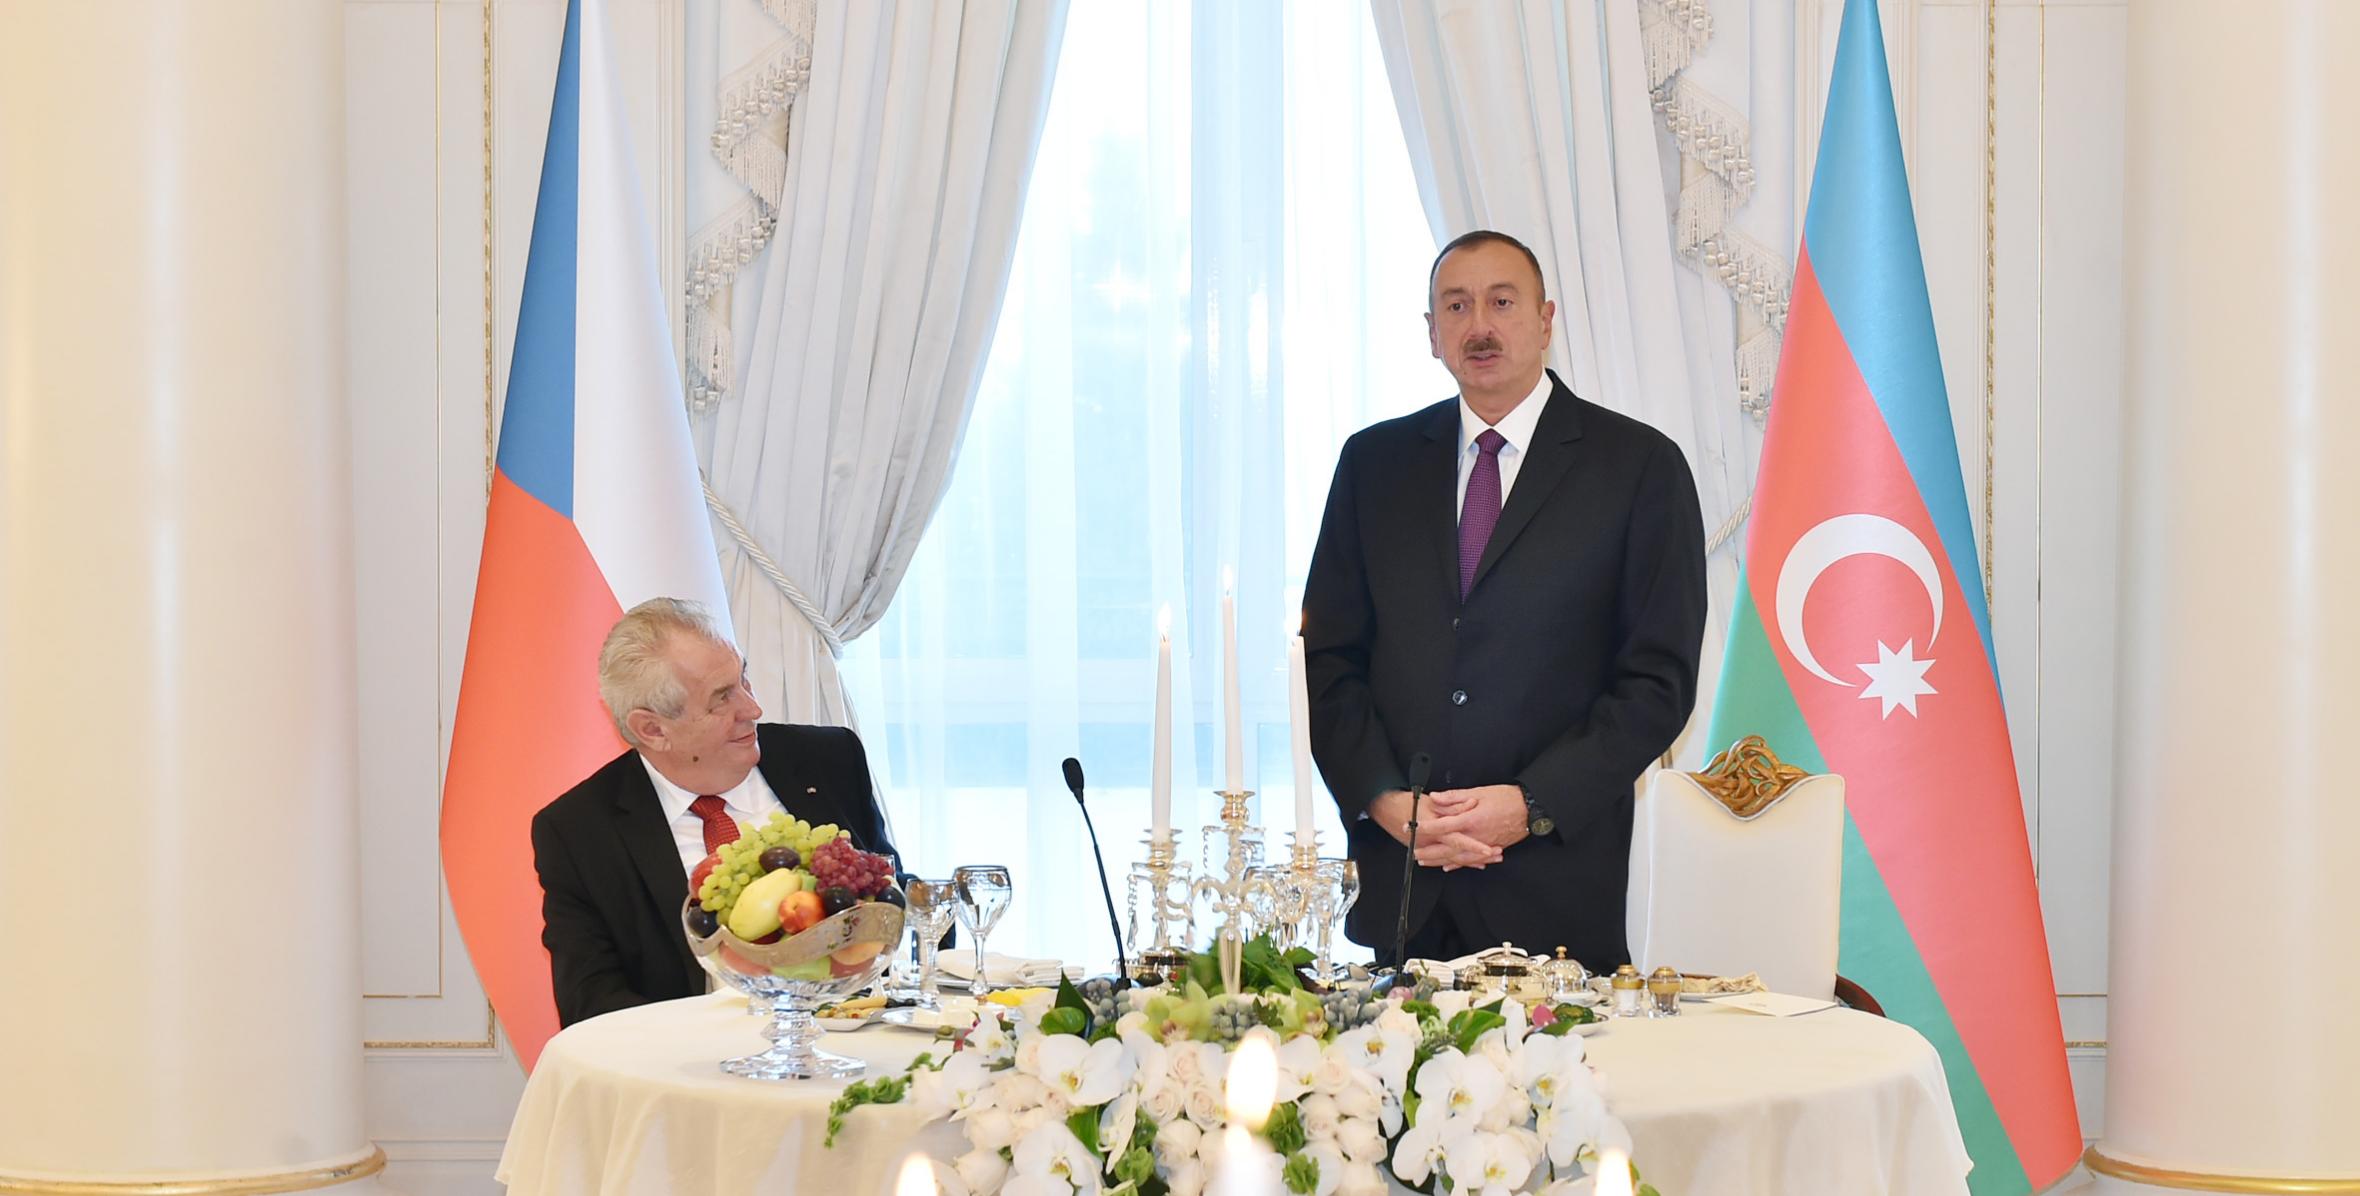 Ilham Aliyev hosted an official reception in honor of President of the Czech Republic Milos Zeman